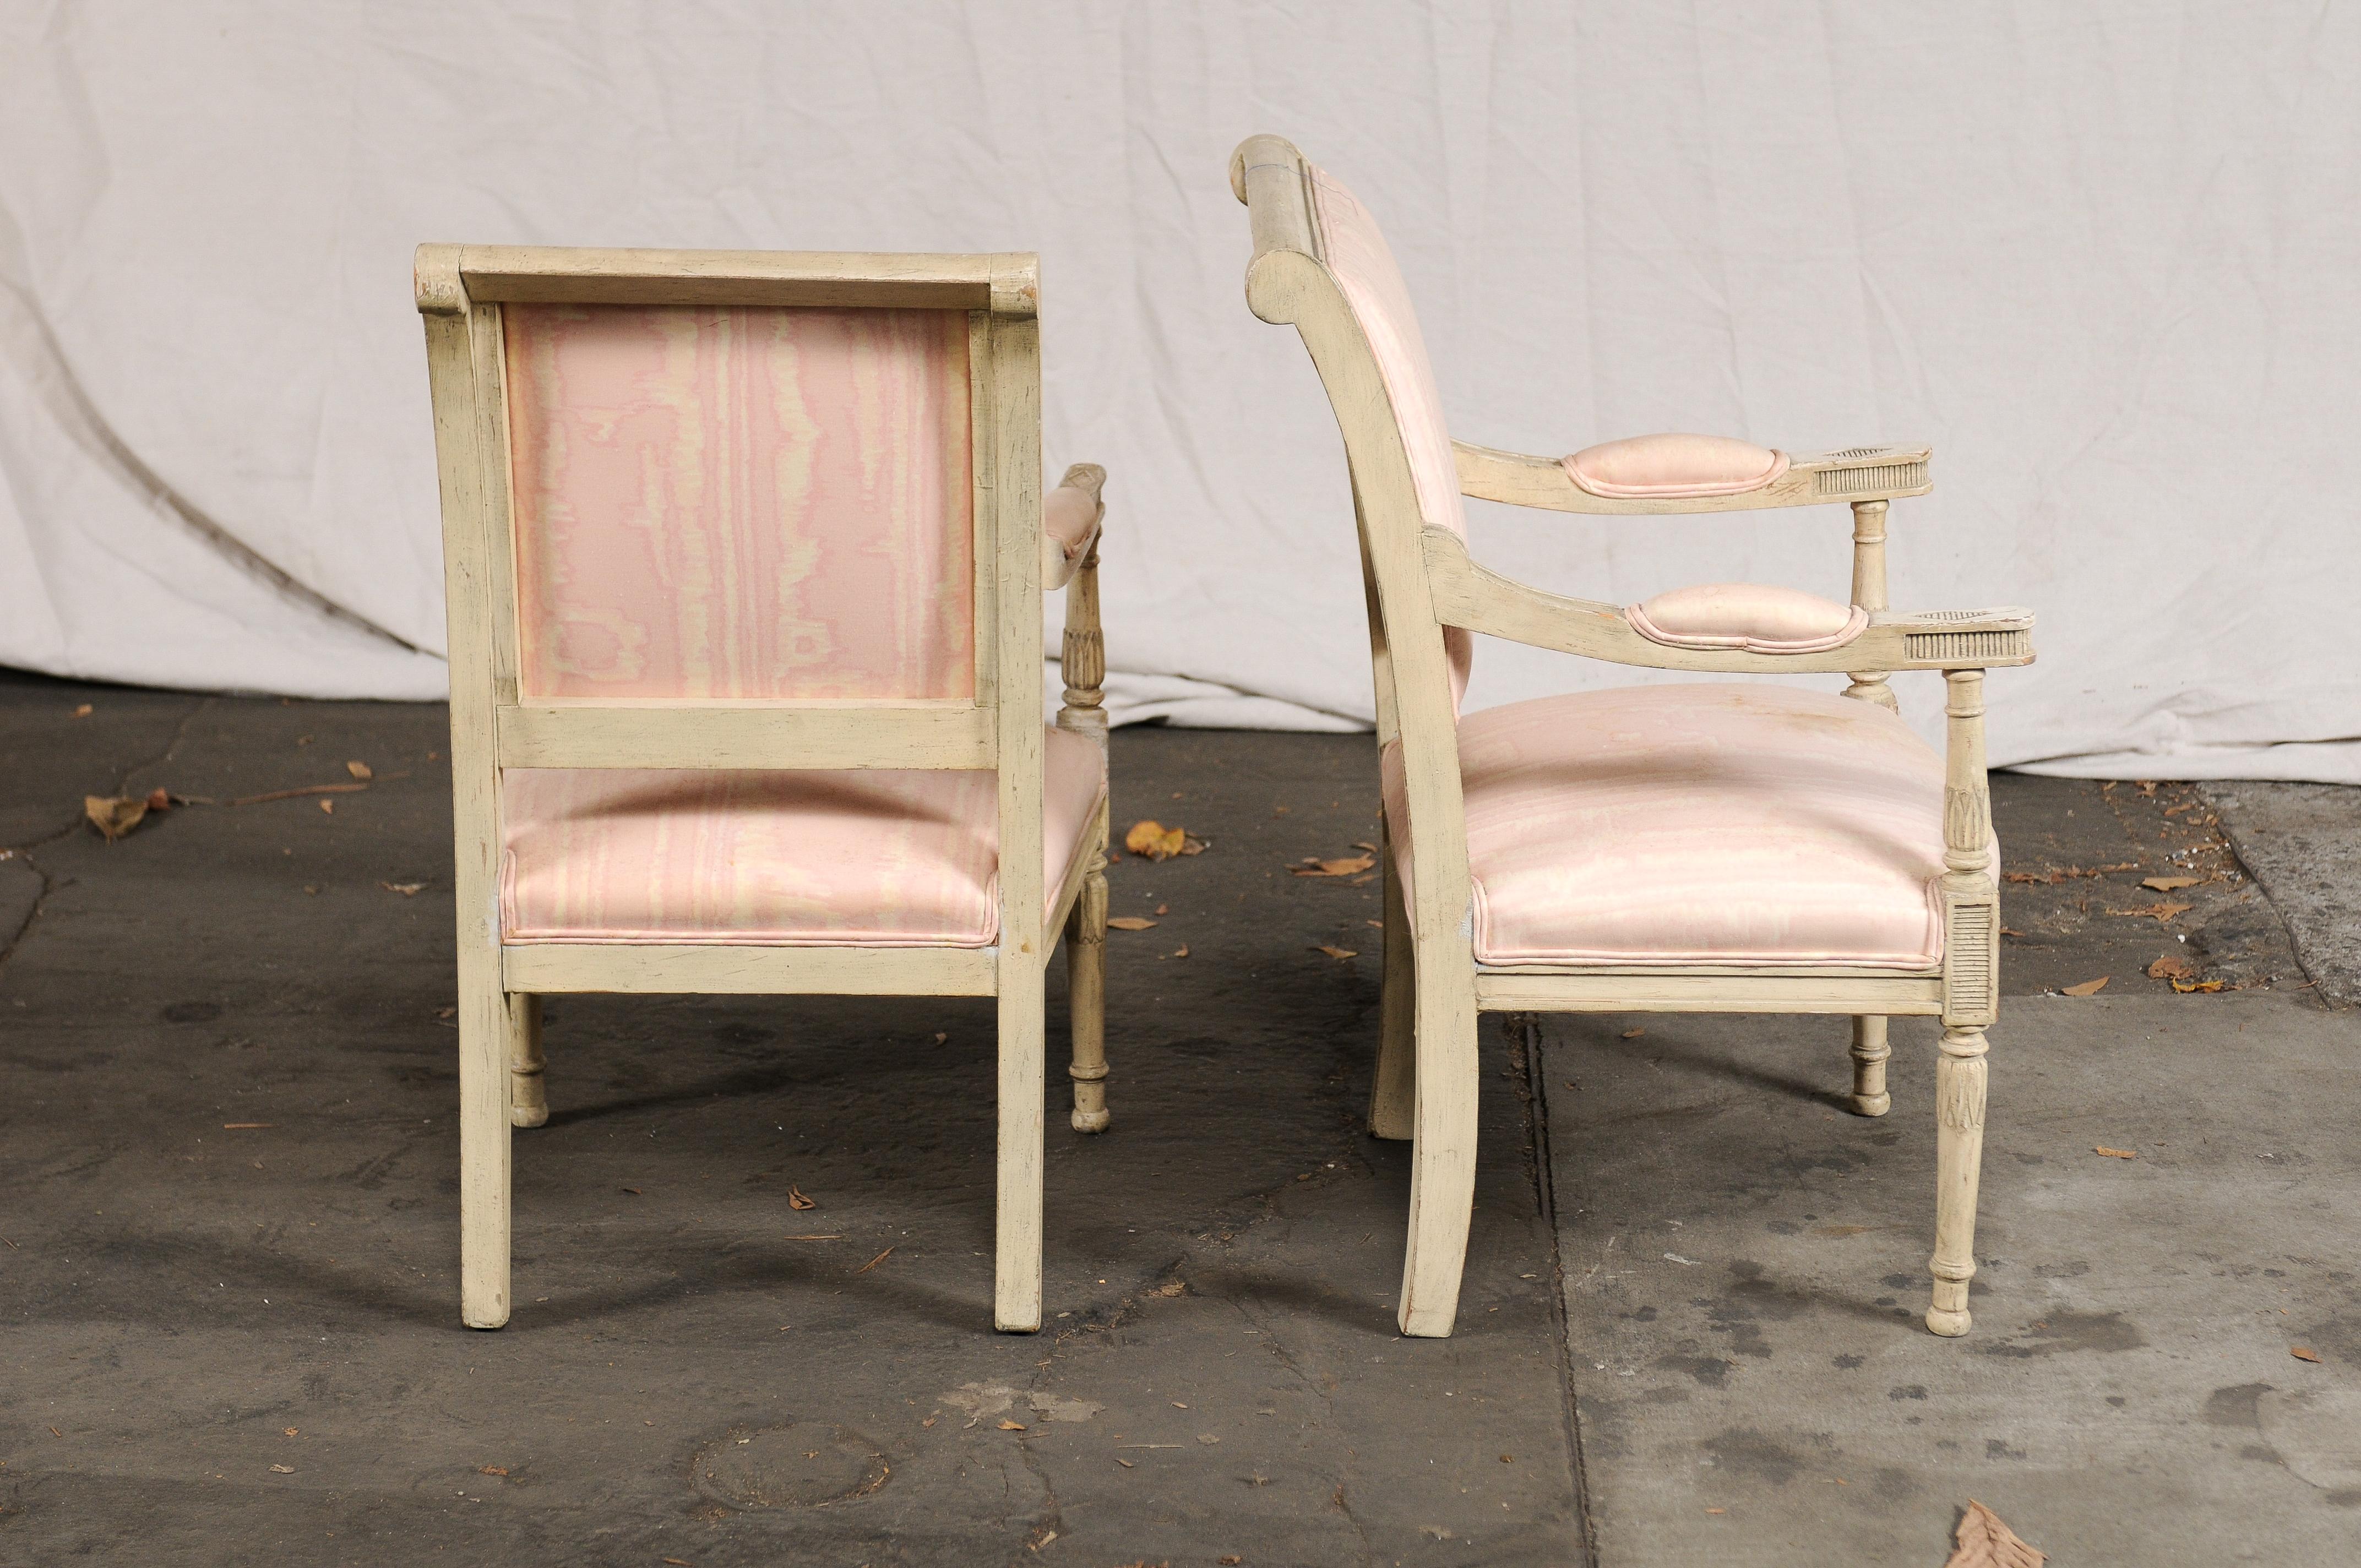 Upholstery Pair of 19th-Early 20th Century French Child's Chairs, Painted Directoire Style